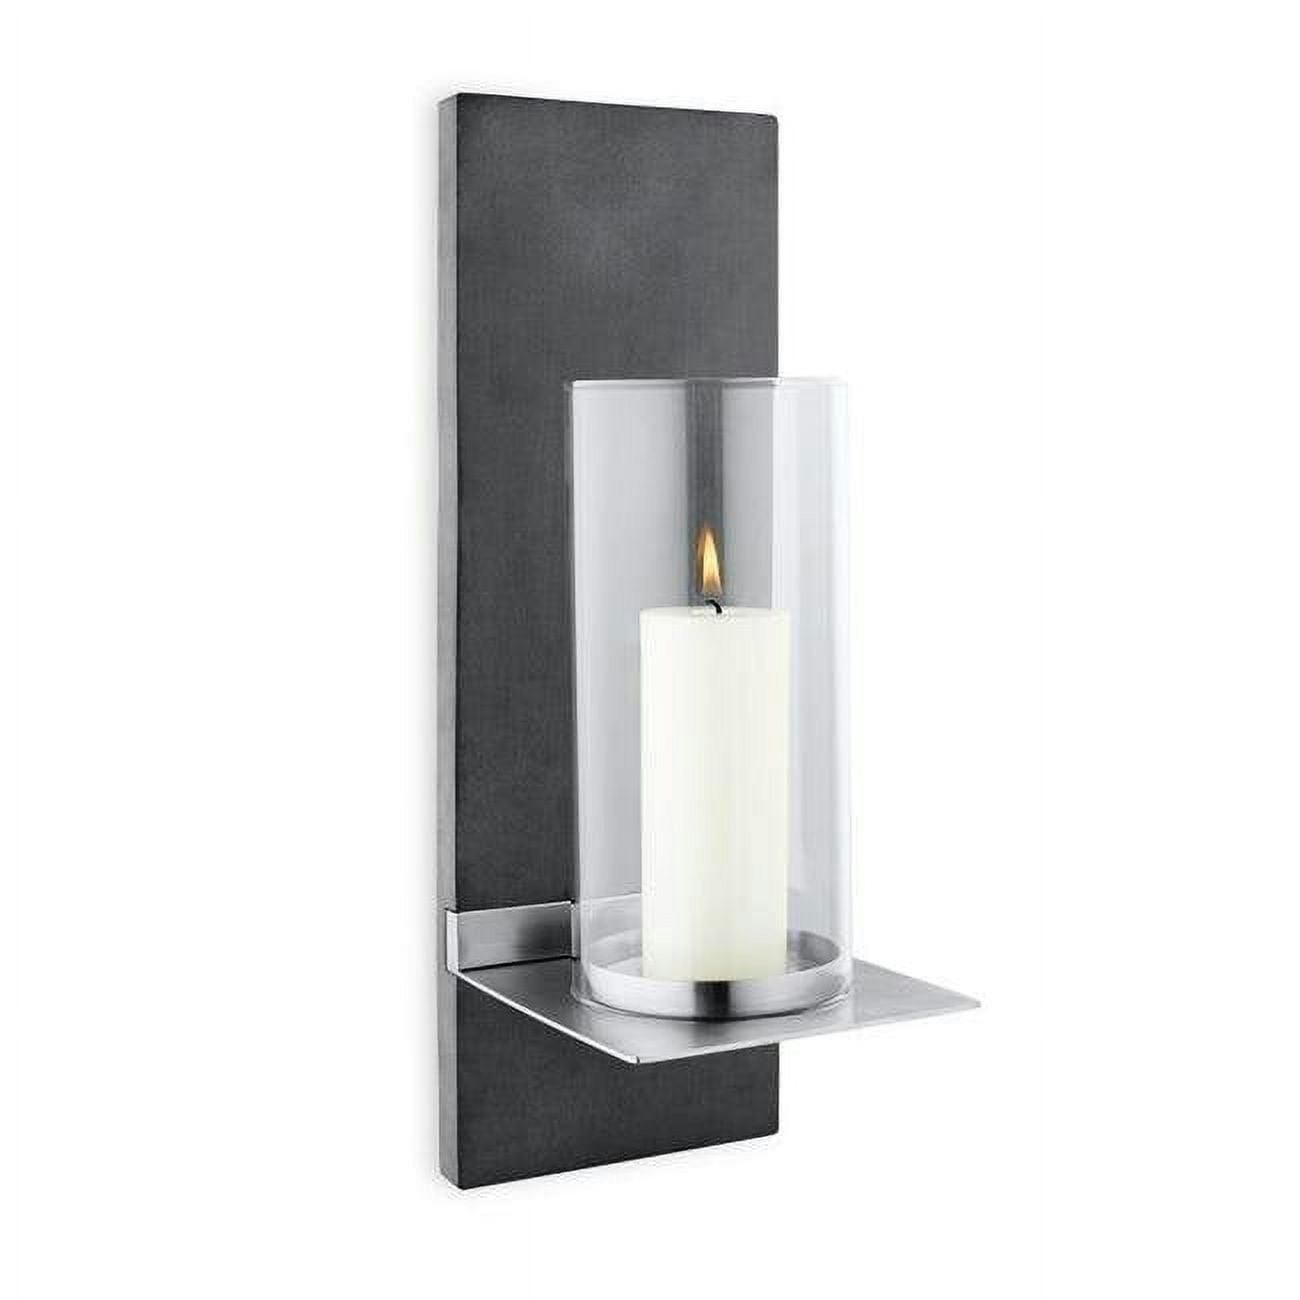 Elegant 15'' Stainless Steel & Glass Outdoor Wall Sconce with White Pillar Candle